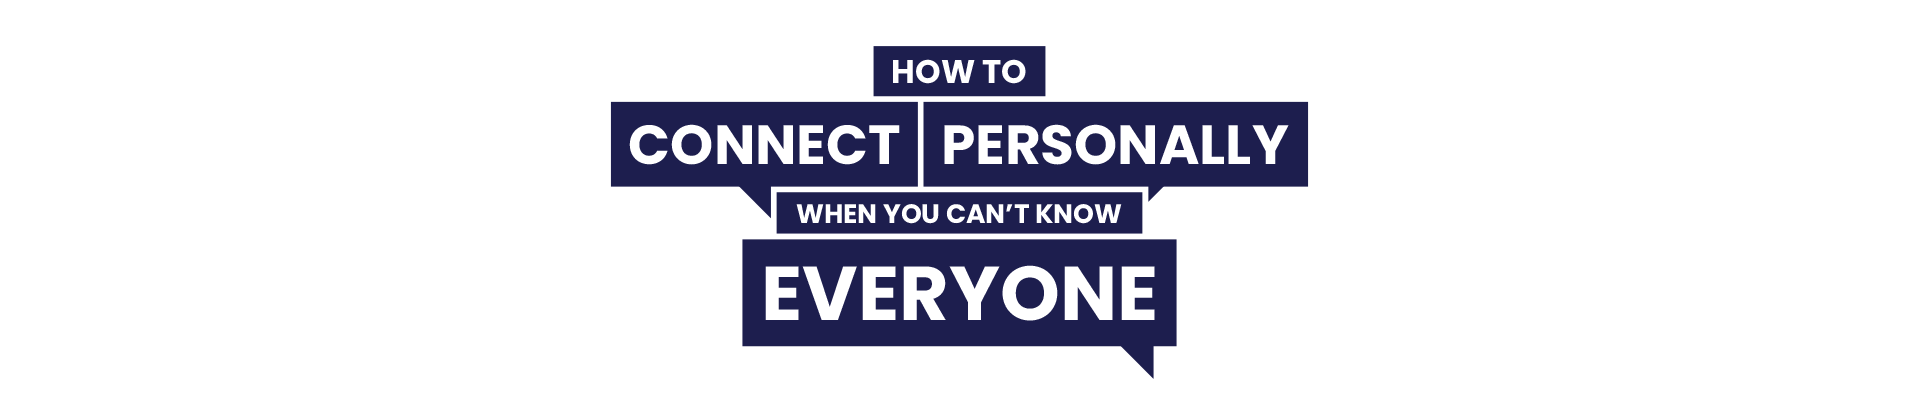 How to Connect Personally When You Can't know Everyone